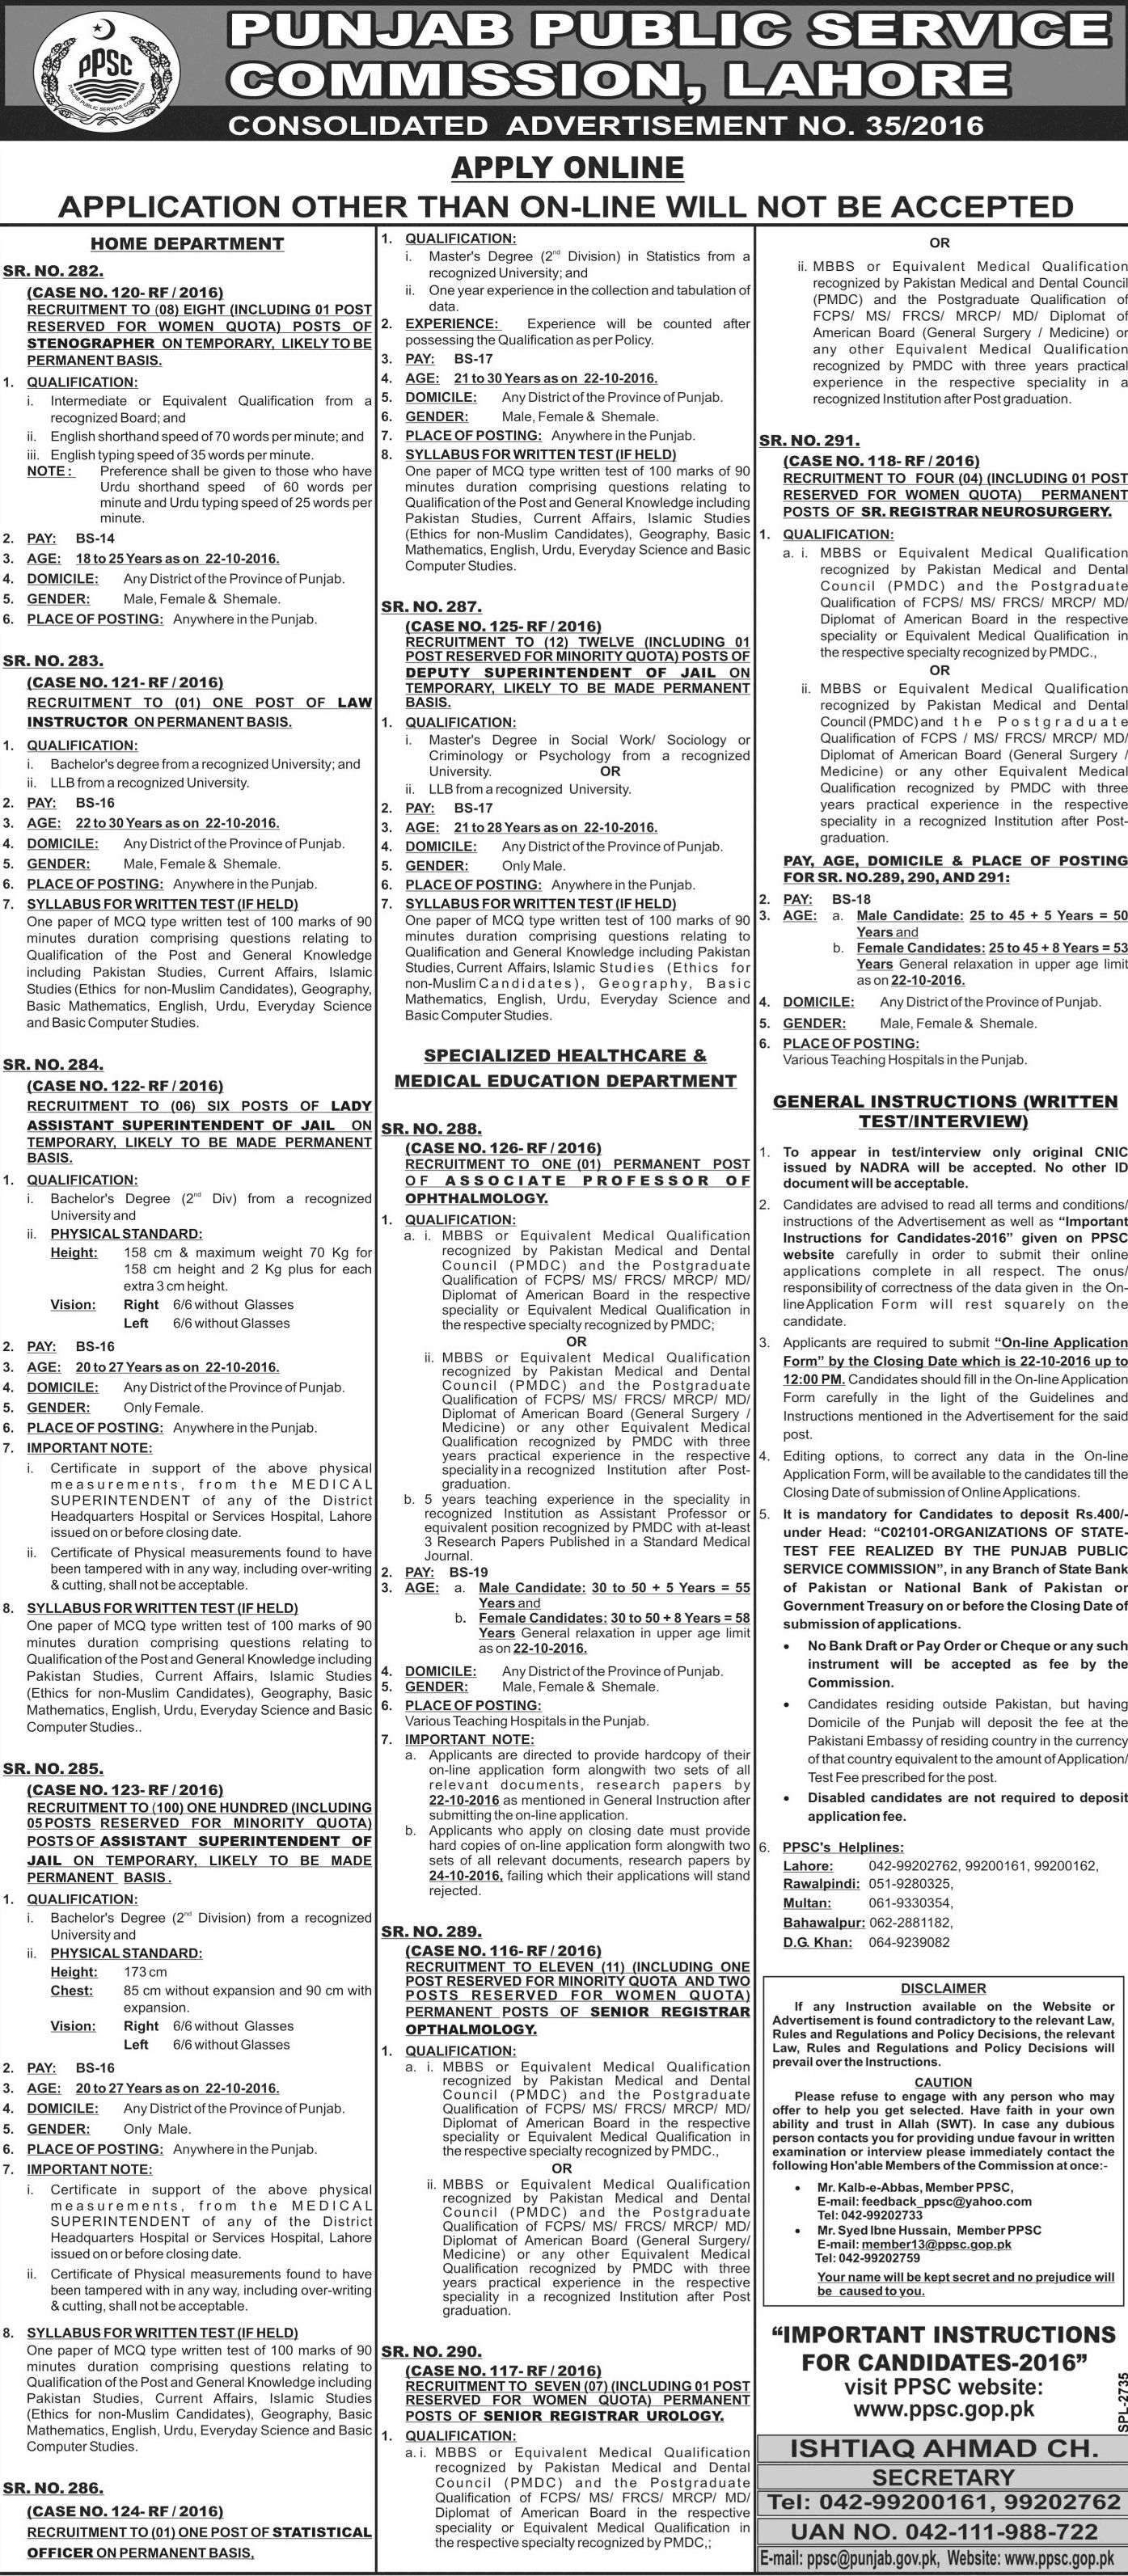 punjab-public-service-commission-ppsc-jobs-2016-for-assistant-superintendent-of-jail-others